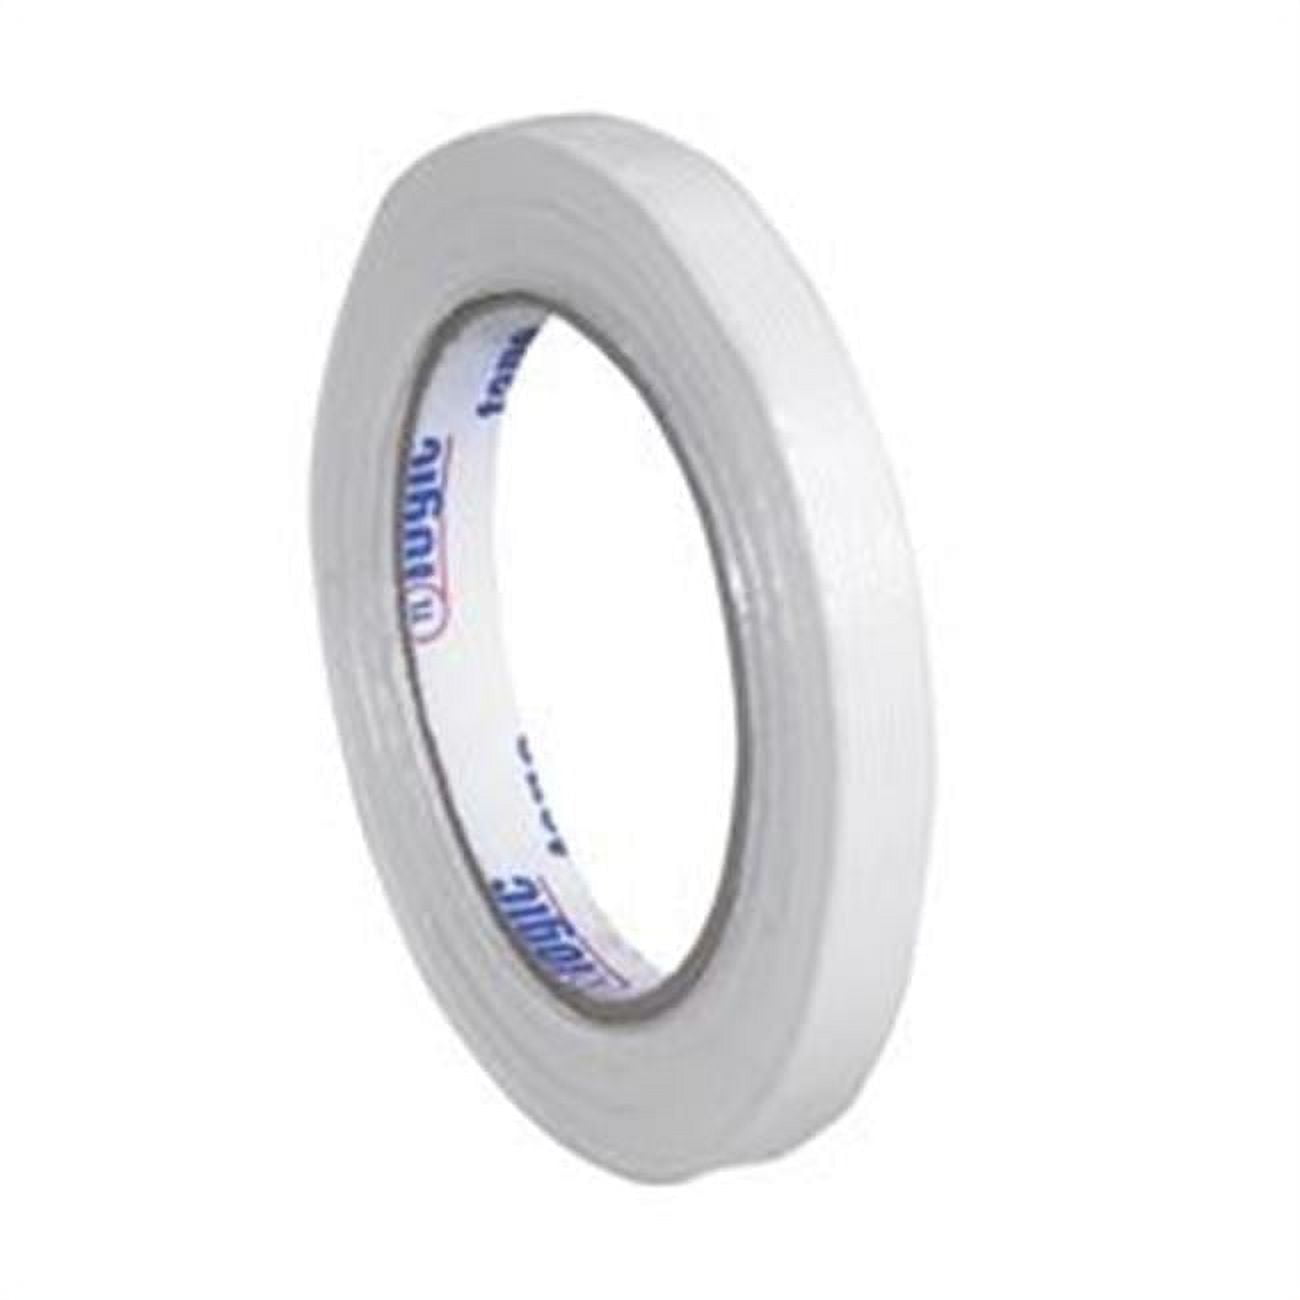 Tape Logic T913130012pk 0.50 In. X 60 Yards 1300 Strapping Tape, Clear - Pack Of 12